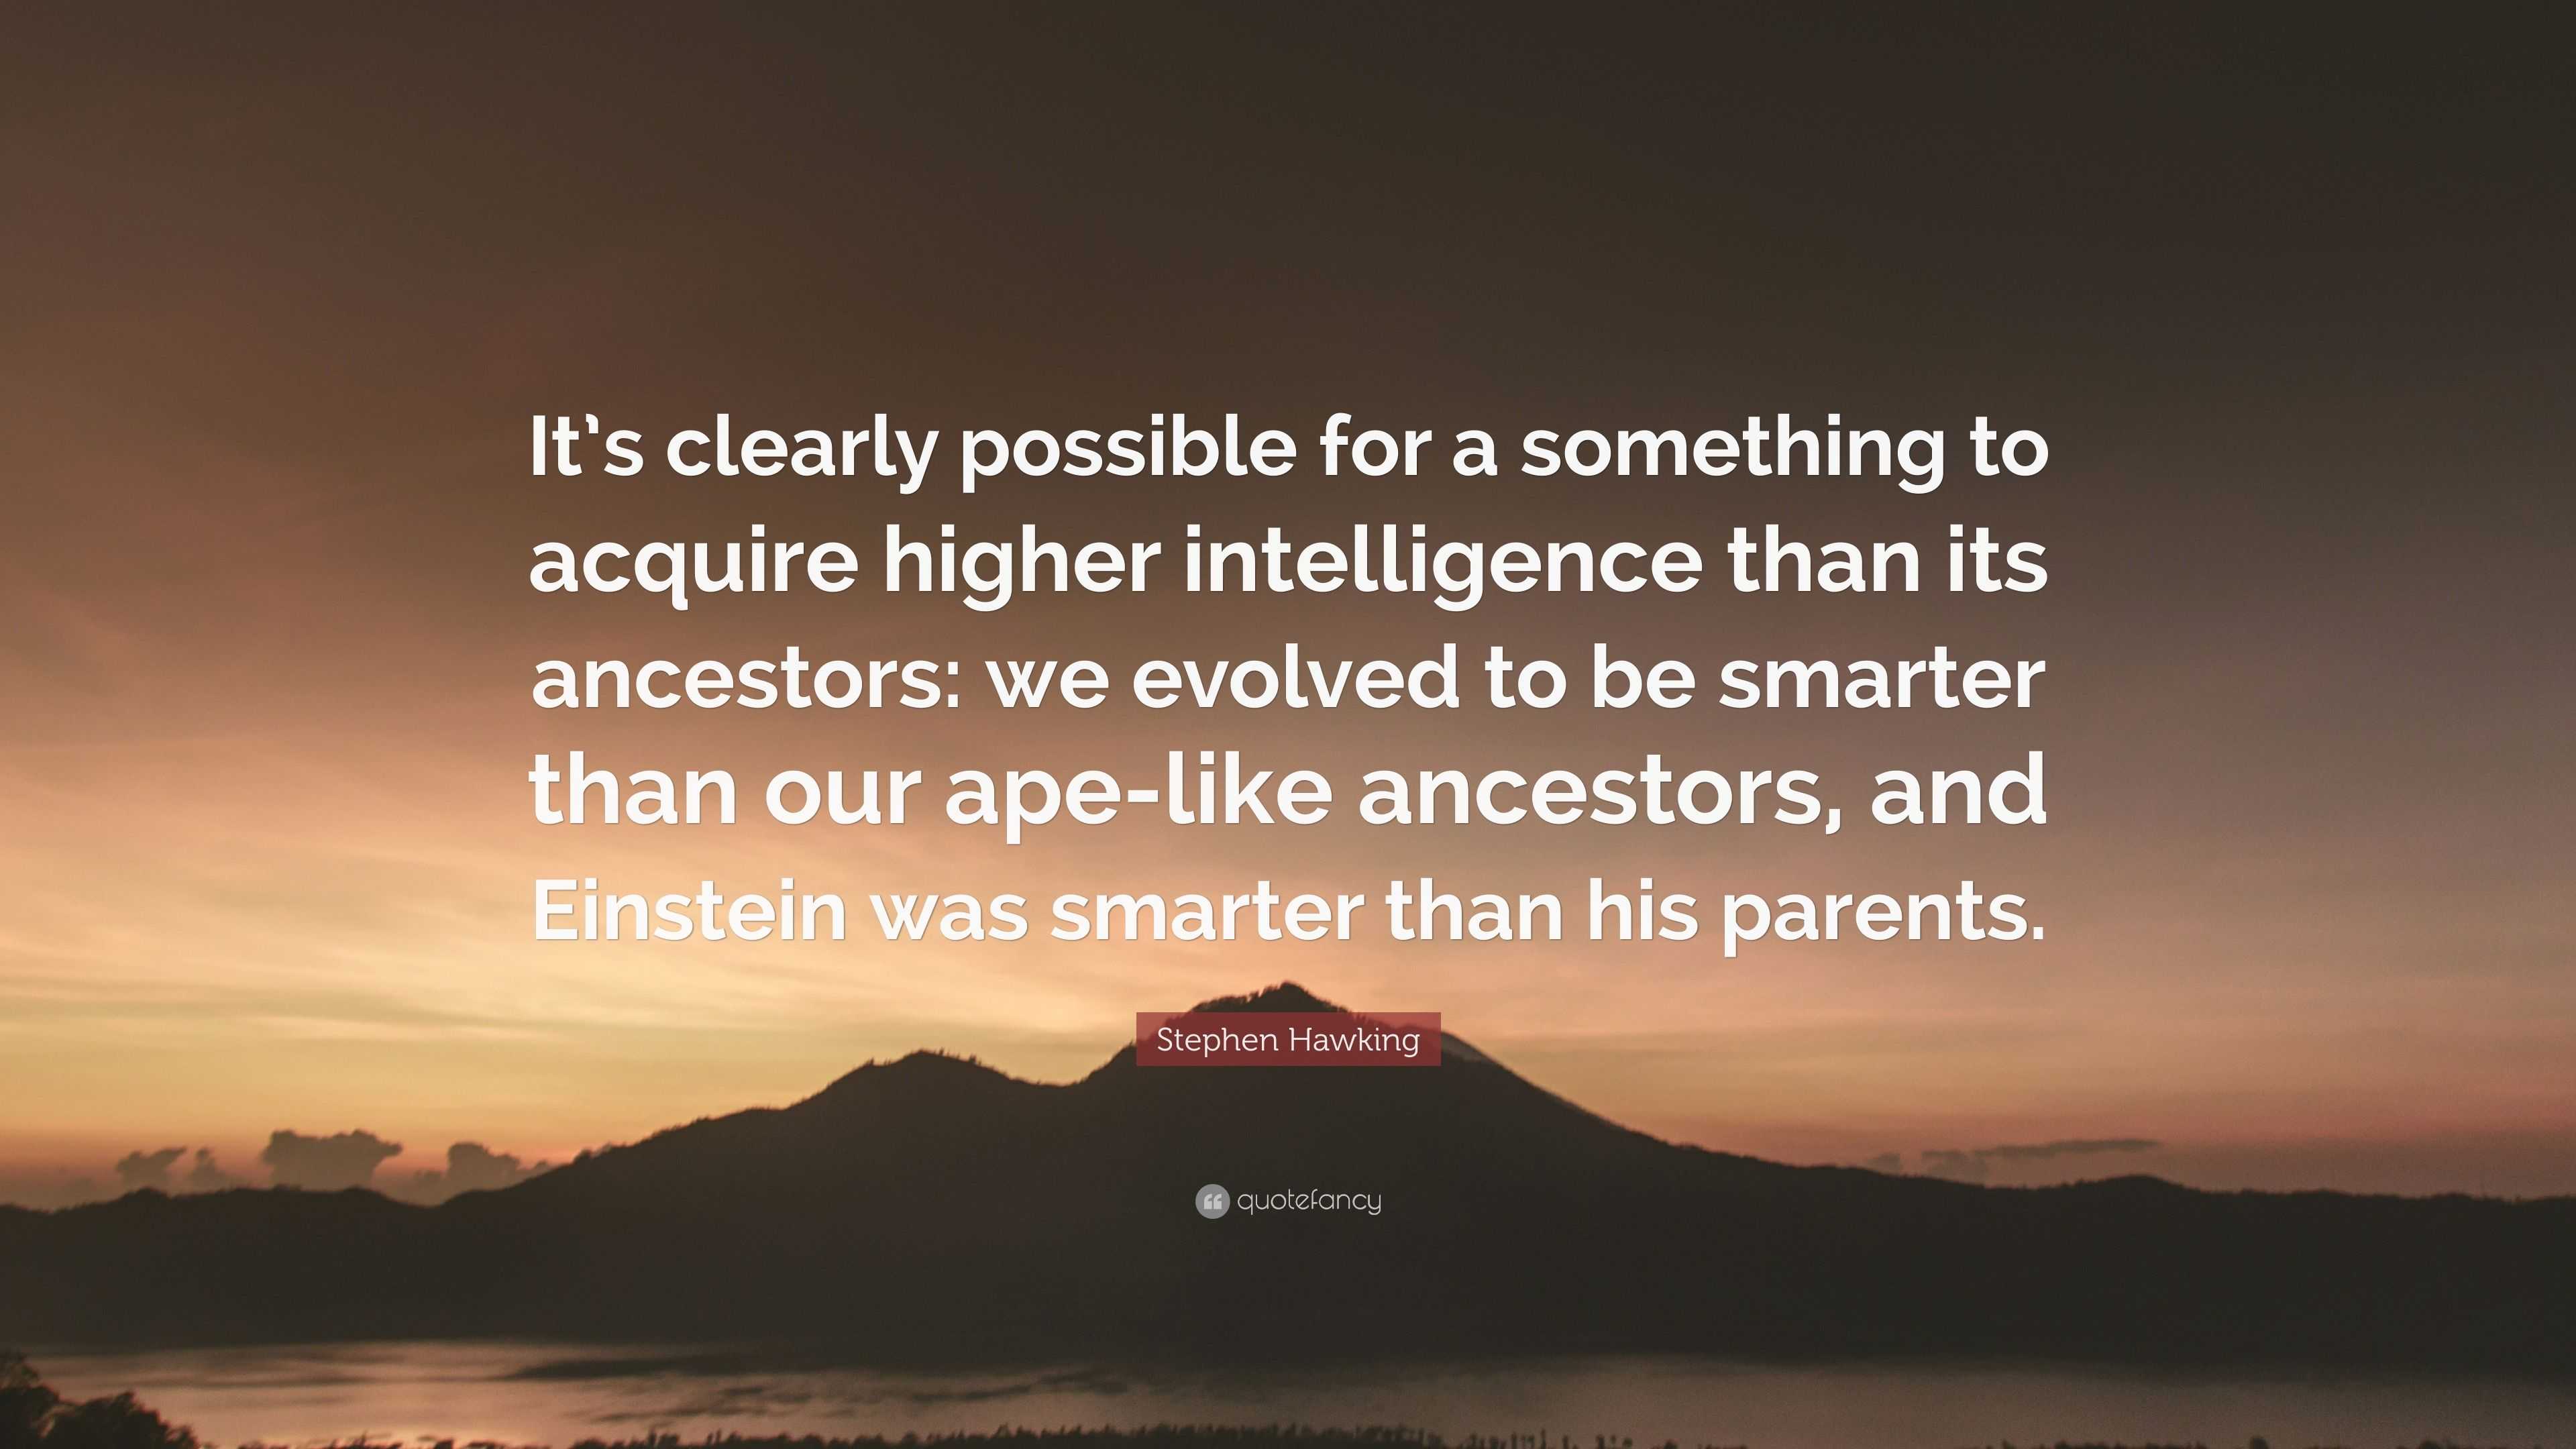 are we smarter than our parents